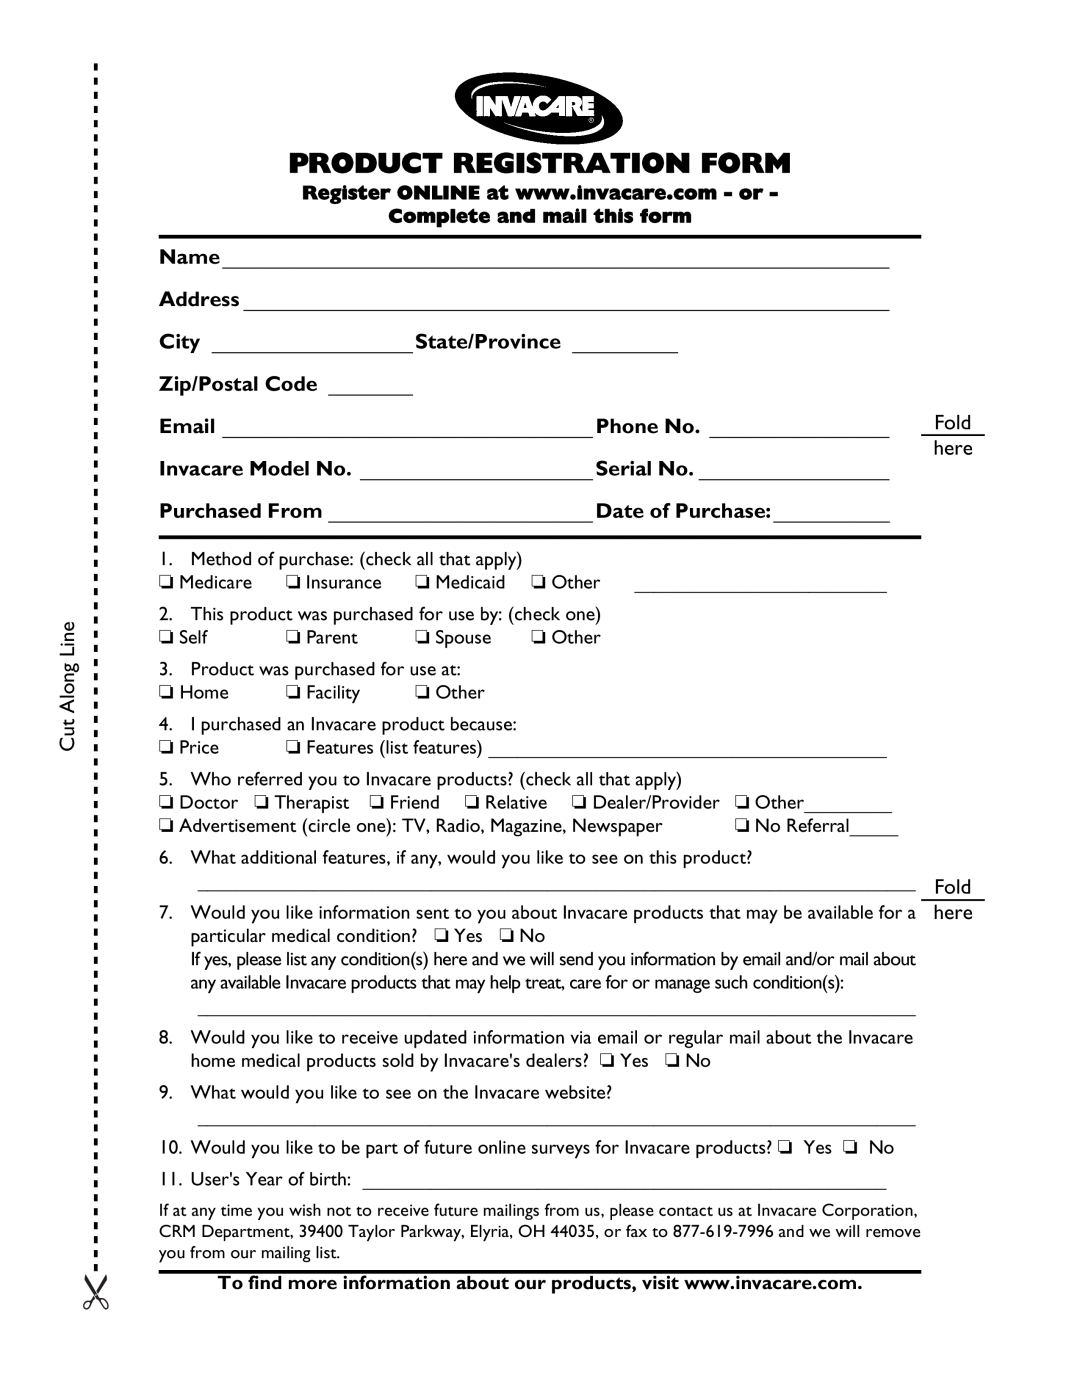 Invacare 1026793 manual Product Registration Form, Cut Along Line, Fold, here, Complete and mail this form, Name, Address 